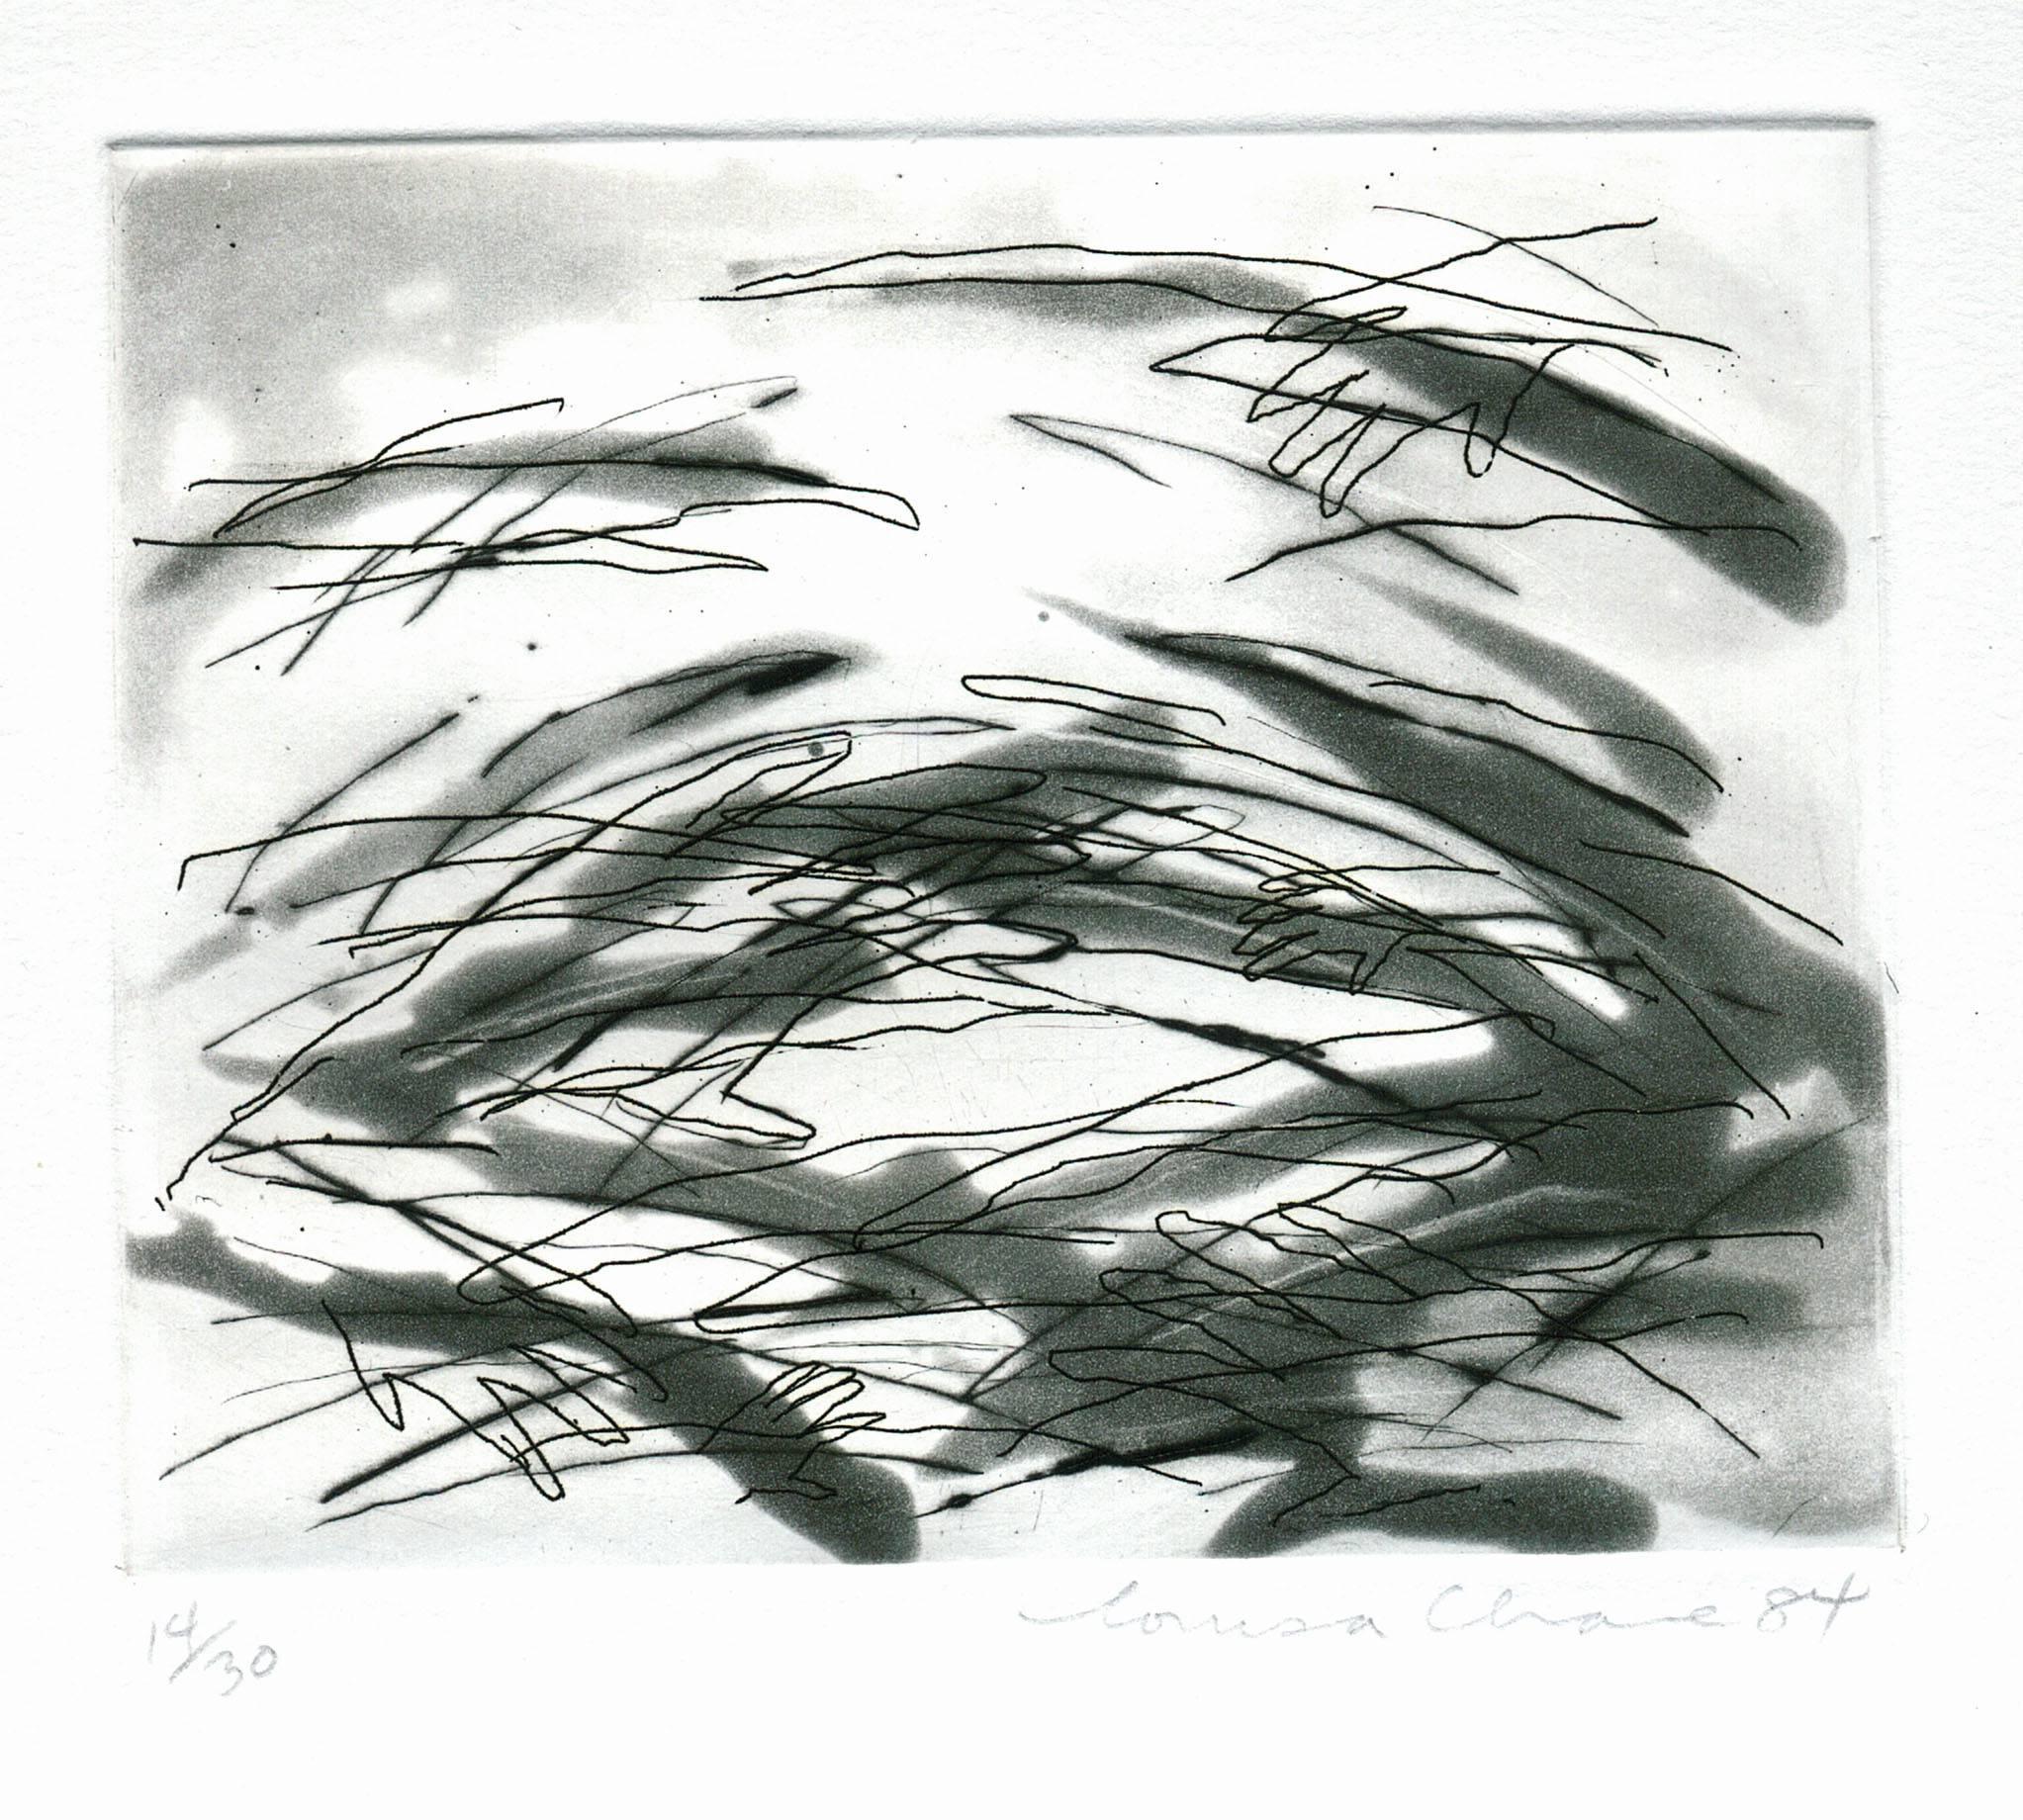 Portfolio of Six Untitled Etchings - Contemporary Print by Louisa Chase